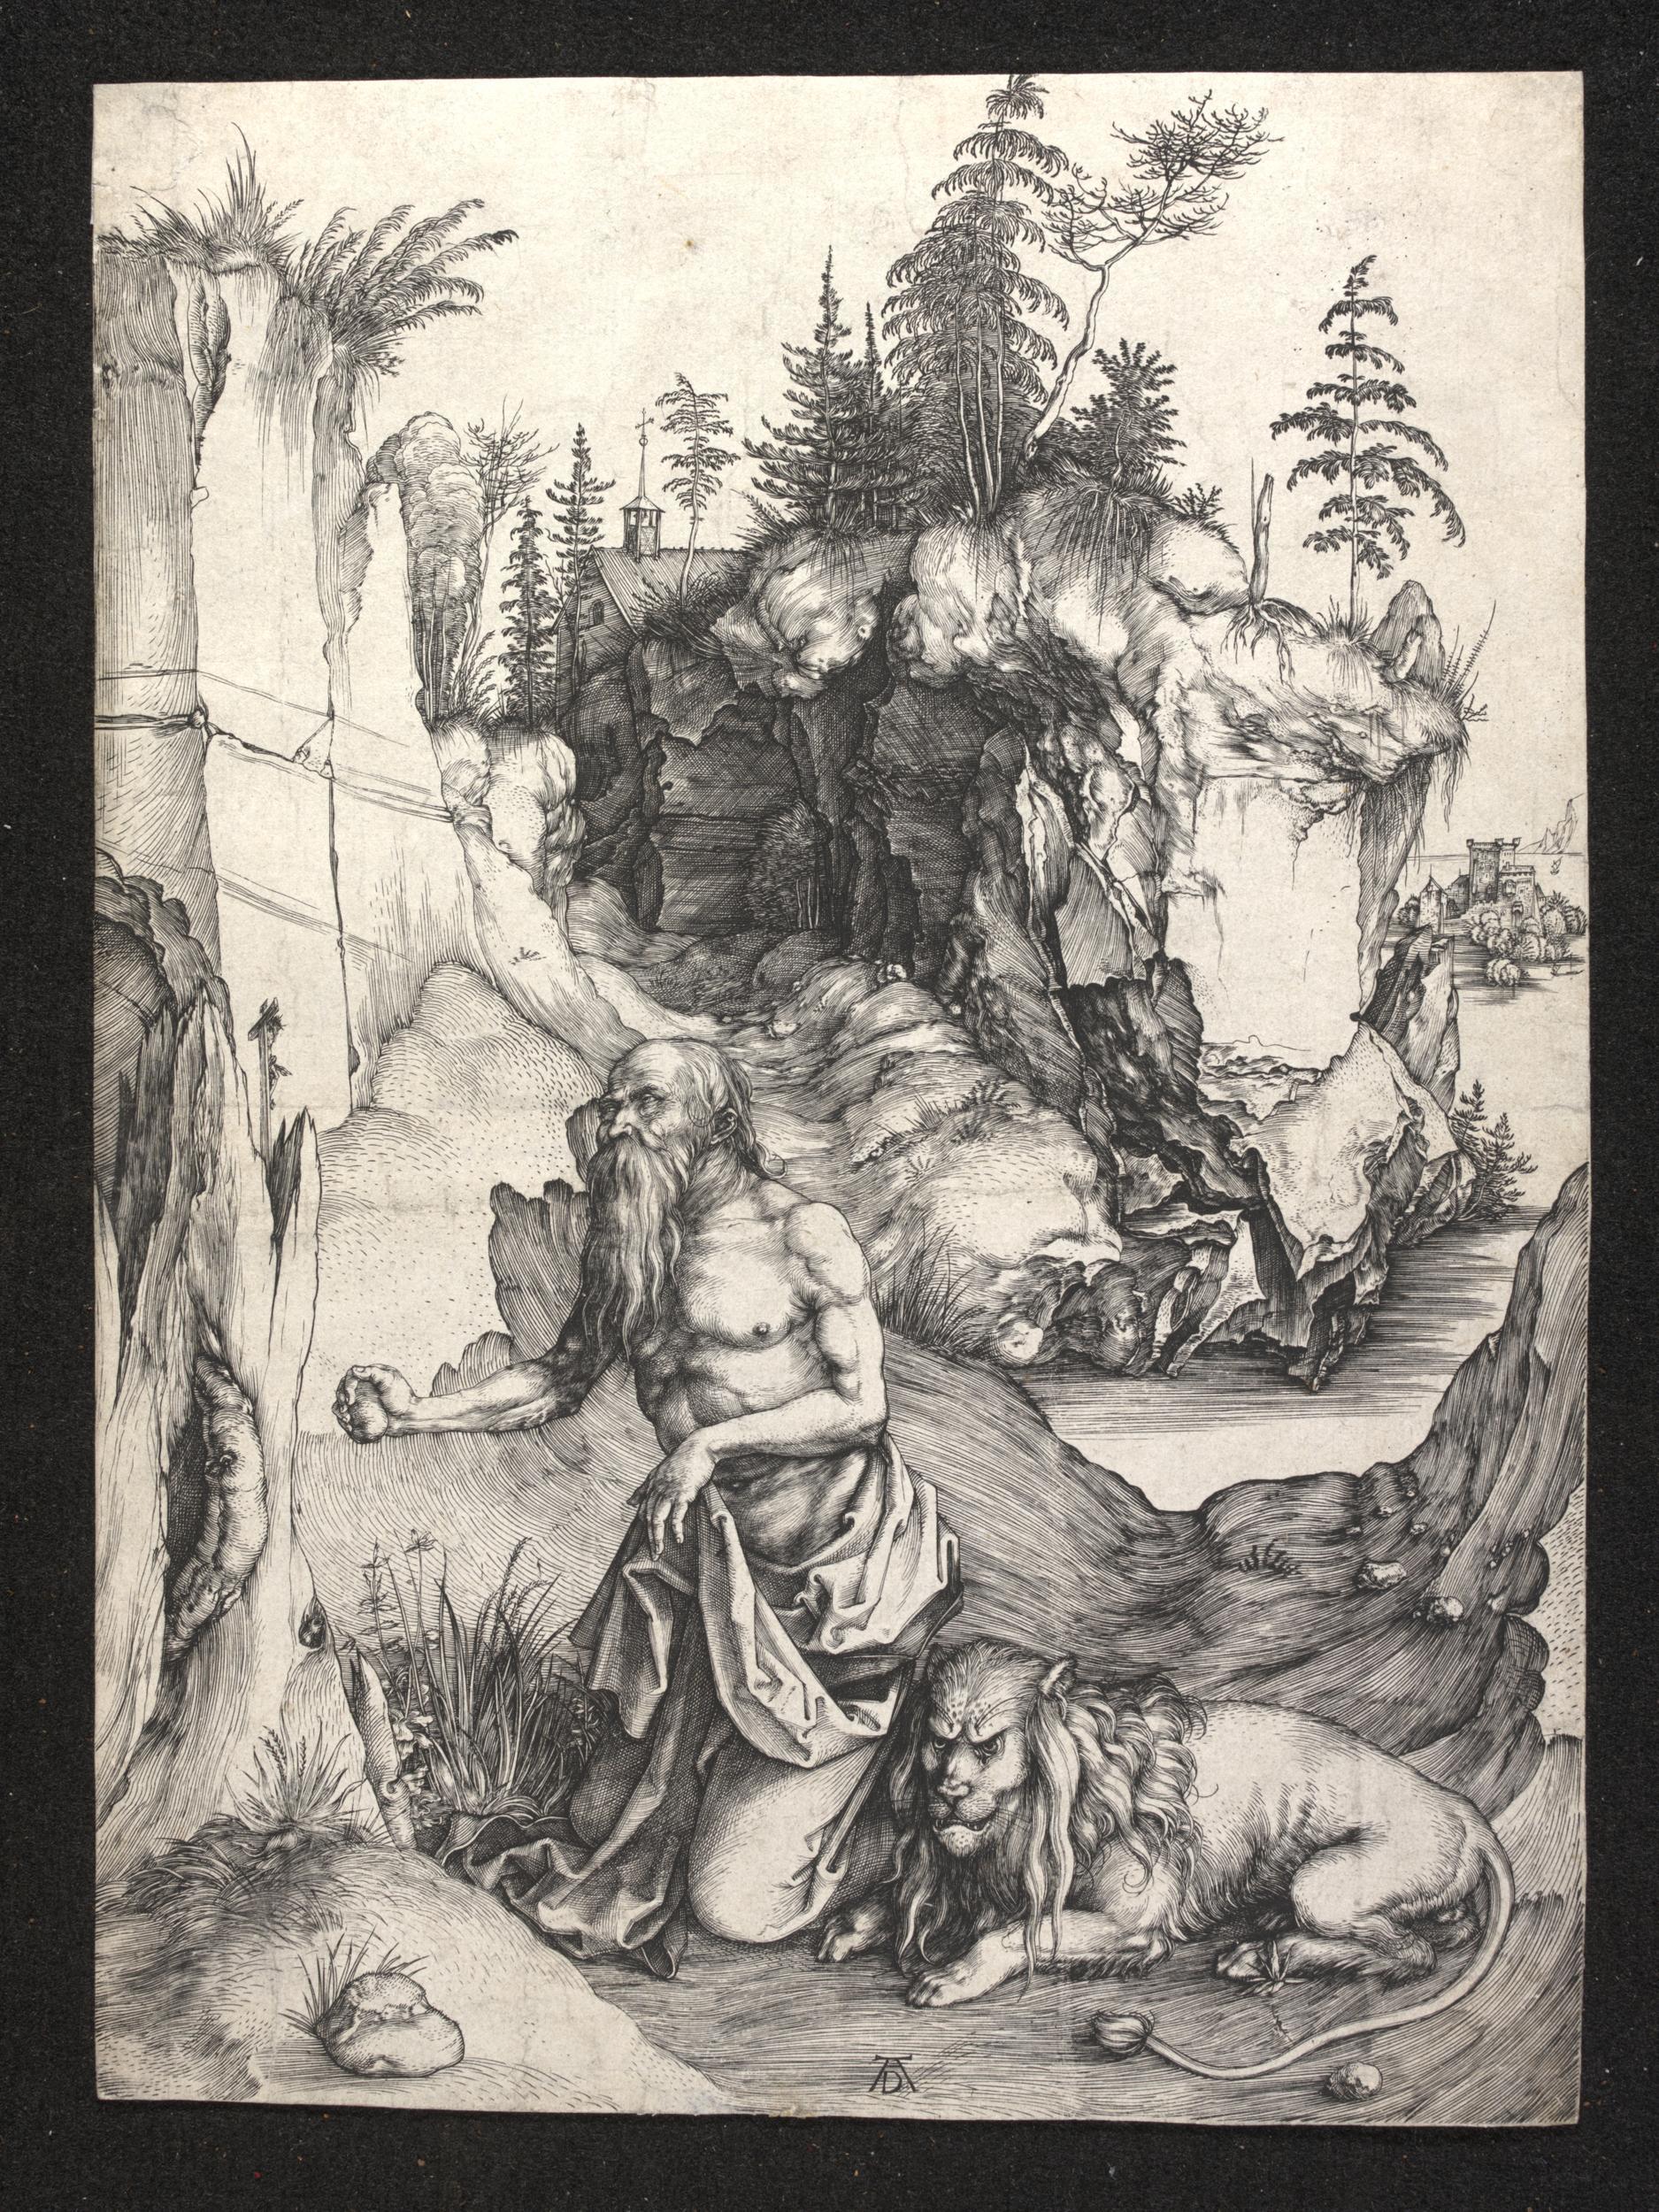 Old black and white sketch of old man and dog next to rocks